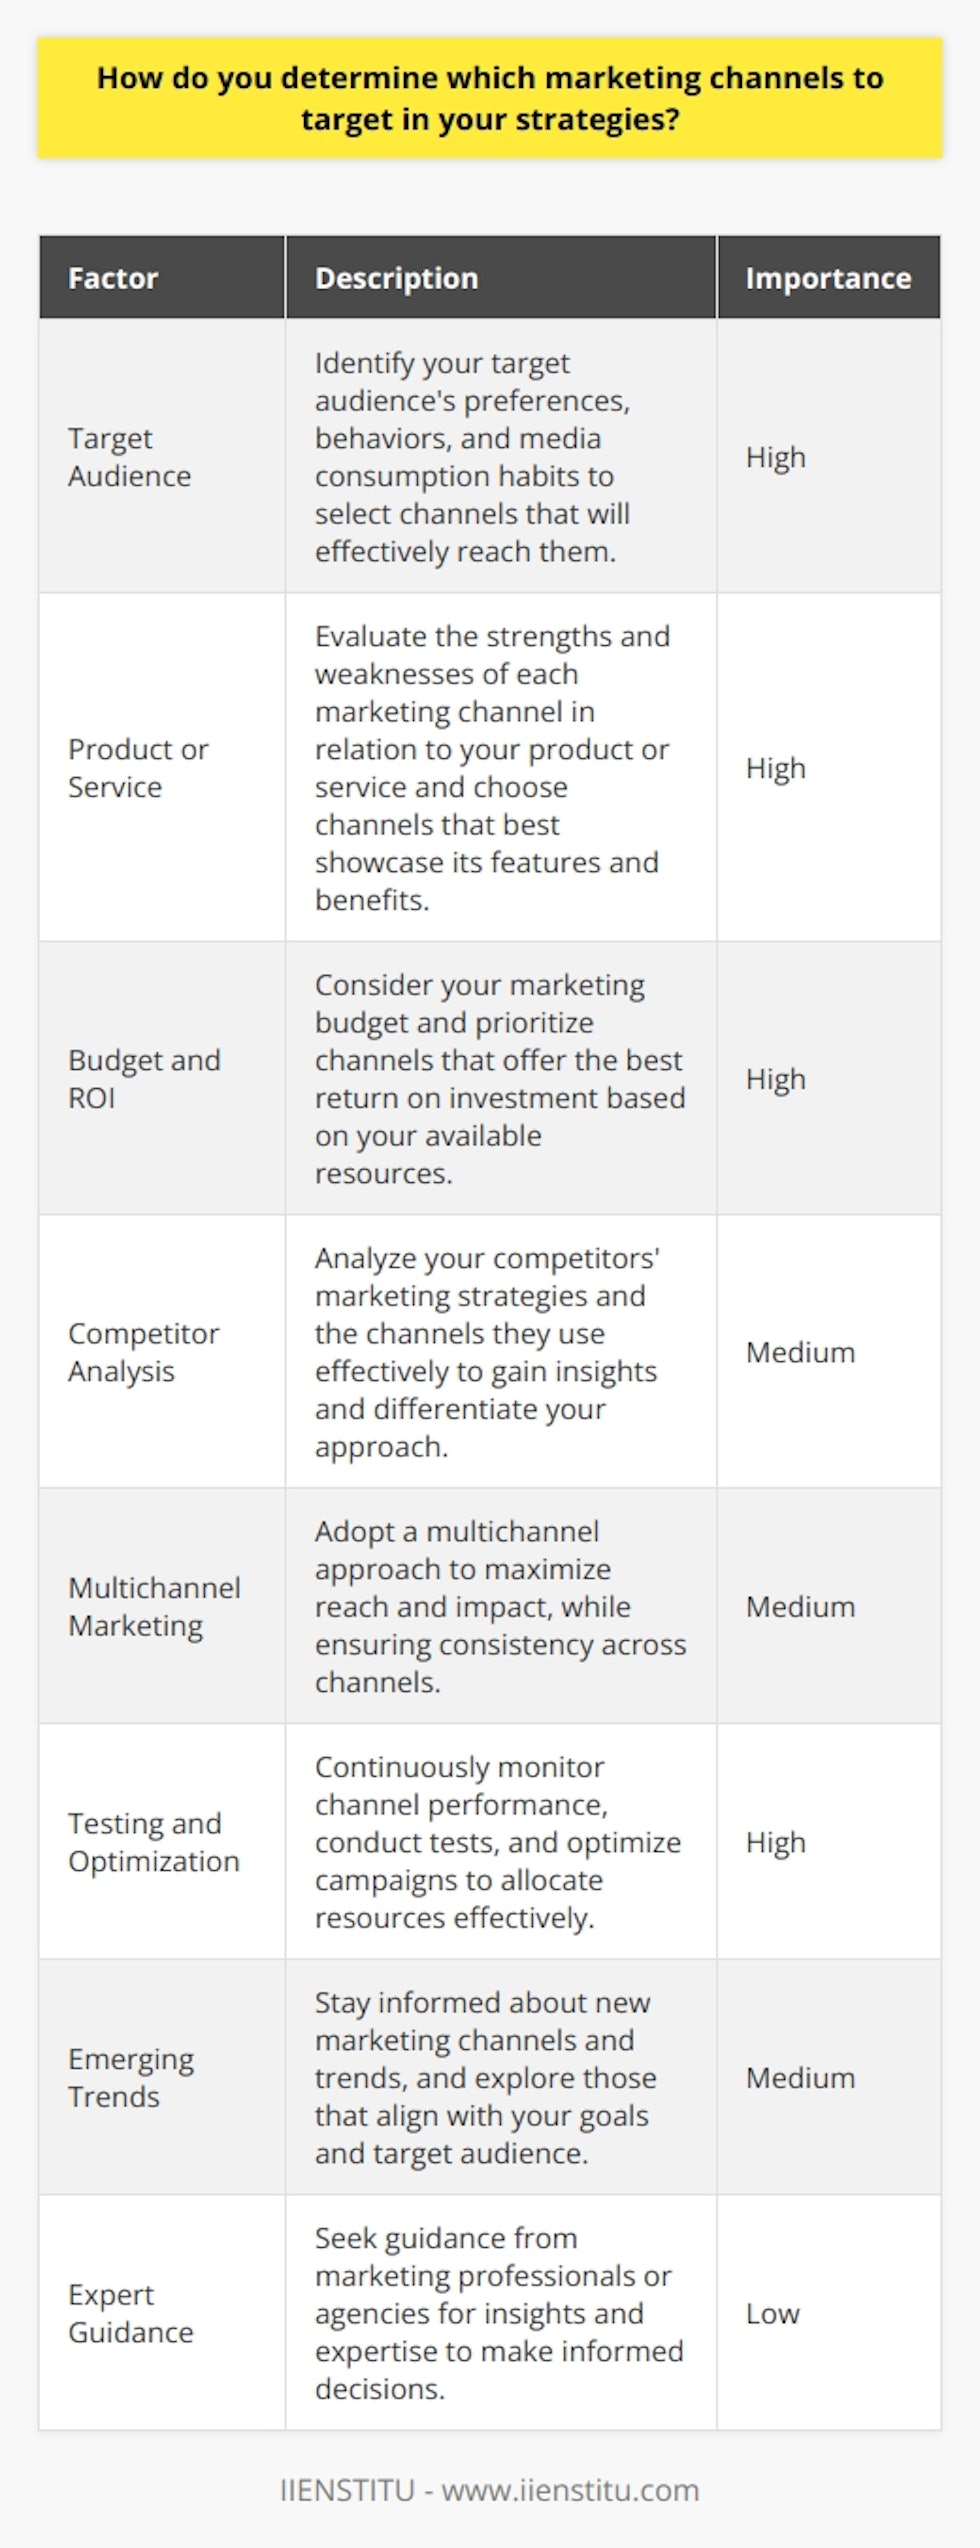 Determining which marketing channels to target in your strategies requires careful consideration of several factors. First, you must identify your target audience and understand their preferences, behaviors, and media consumption habits. This knowledge will help you select the channels that are most likely to reach and engage your desired customers. Next, evaluate the strengths and weaknesses of each marketing channel in relation to your product or service. Consider the nature of your offering and determine which channels are best suited to showcase its features and benefits. For example, visual platforms like Instagram and YouTube may be more effective for promoting fashion or beauty products, while LinkedIn may be better for B2B services. Budgetary Constraints and ROI Your marketing budget will also play a crucial role in channel selection. Some channels, such as television advertising, can be expensive and may not be feasible for small businesses. Evaluate the costs associated with each channel and prioritize those that offer the best return on investment (ROI) based on your available resources. Competitor Analysis Analyzing your competitors marketing strategies can provide valuable insights into which channels are effective in your industry. Identify the channels they are using and assess their level of success. This information can help you make informed decisions about which channels to pursue and how to differentiate your approach. Multichannel Marketing Consider adopting a multichannel marketing approach to maximize your reach and impact. By leveraging a combination of channels, you can engage with your audience at multiple touchpoints and reinforce your message. However, ensure that your chosen channels work together seamlessly and provide a consistent brand experience. Testing and Optimization Once you have selected your target channels, continuously monitor their performance and adjust your strategy as needed. Conduct regular tests and experiments to optimize your campaigns and allocate your resources towards the channels that generate the best results. Remember that marketing is an iterative process, and what works today may not be as effective tomorrow. Staying Up-to-Date Stay informed about emerging marketing channels and trends. The digital landscape is constantly evolving, and new platforms and technologies are regularly introduced. Be open to exploring new channels that align with your target audience and marketing goals, but always assess their potential before investing significant resources. Seek Expert Guidance If you are unsure about which marketing channels to target, consider seeking guidance from marketing professionals or agencies. They can provide valuable insights based on their experience and expertise, helping you make informed decisions and avoid costly mistakes. In conclusion, selecting the right marketing channels requires a strategic approach that considers your target audience, product or service, budget, competitors, and industry trends. By carefully evaluating these factors and continuously optimizing your efforts, you can develop an effective marketing strategy that drives results and helps you achieve your business goals.